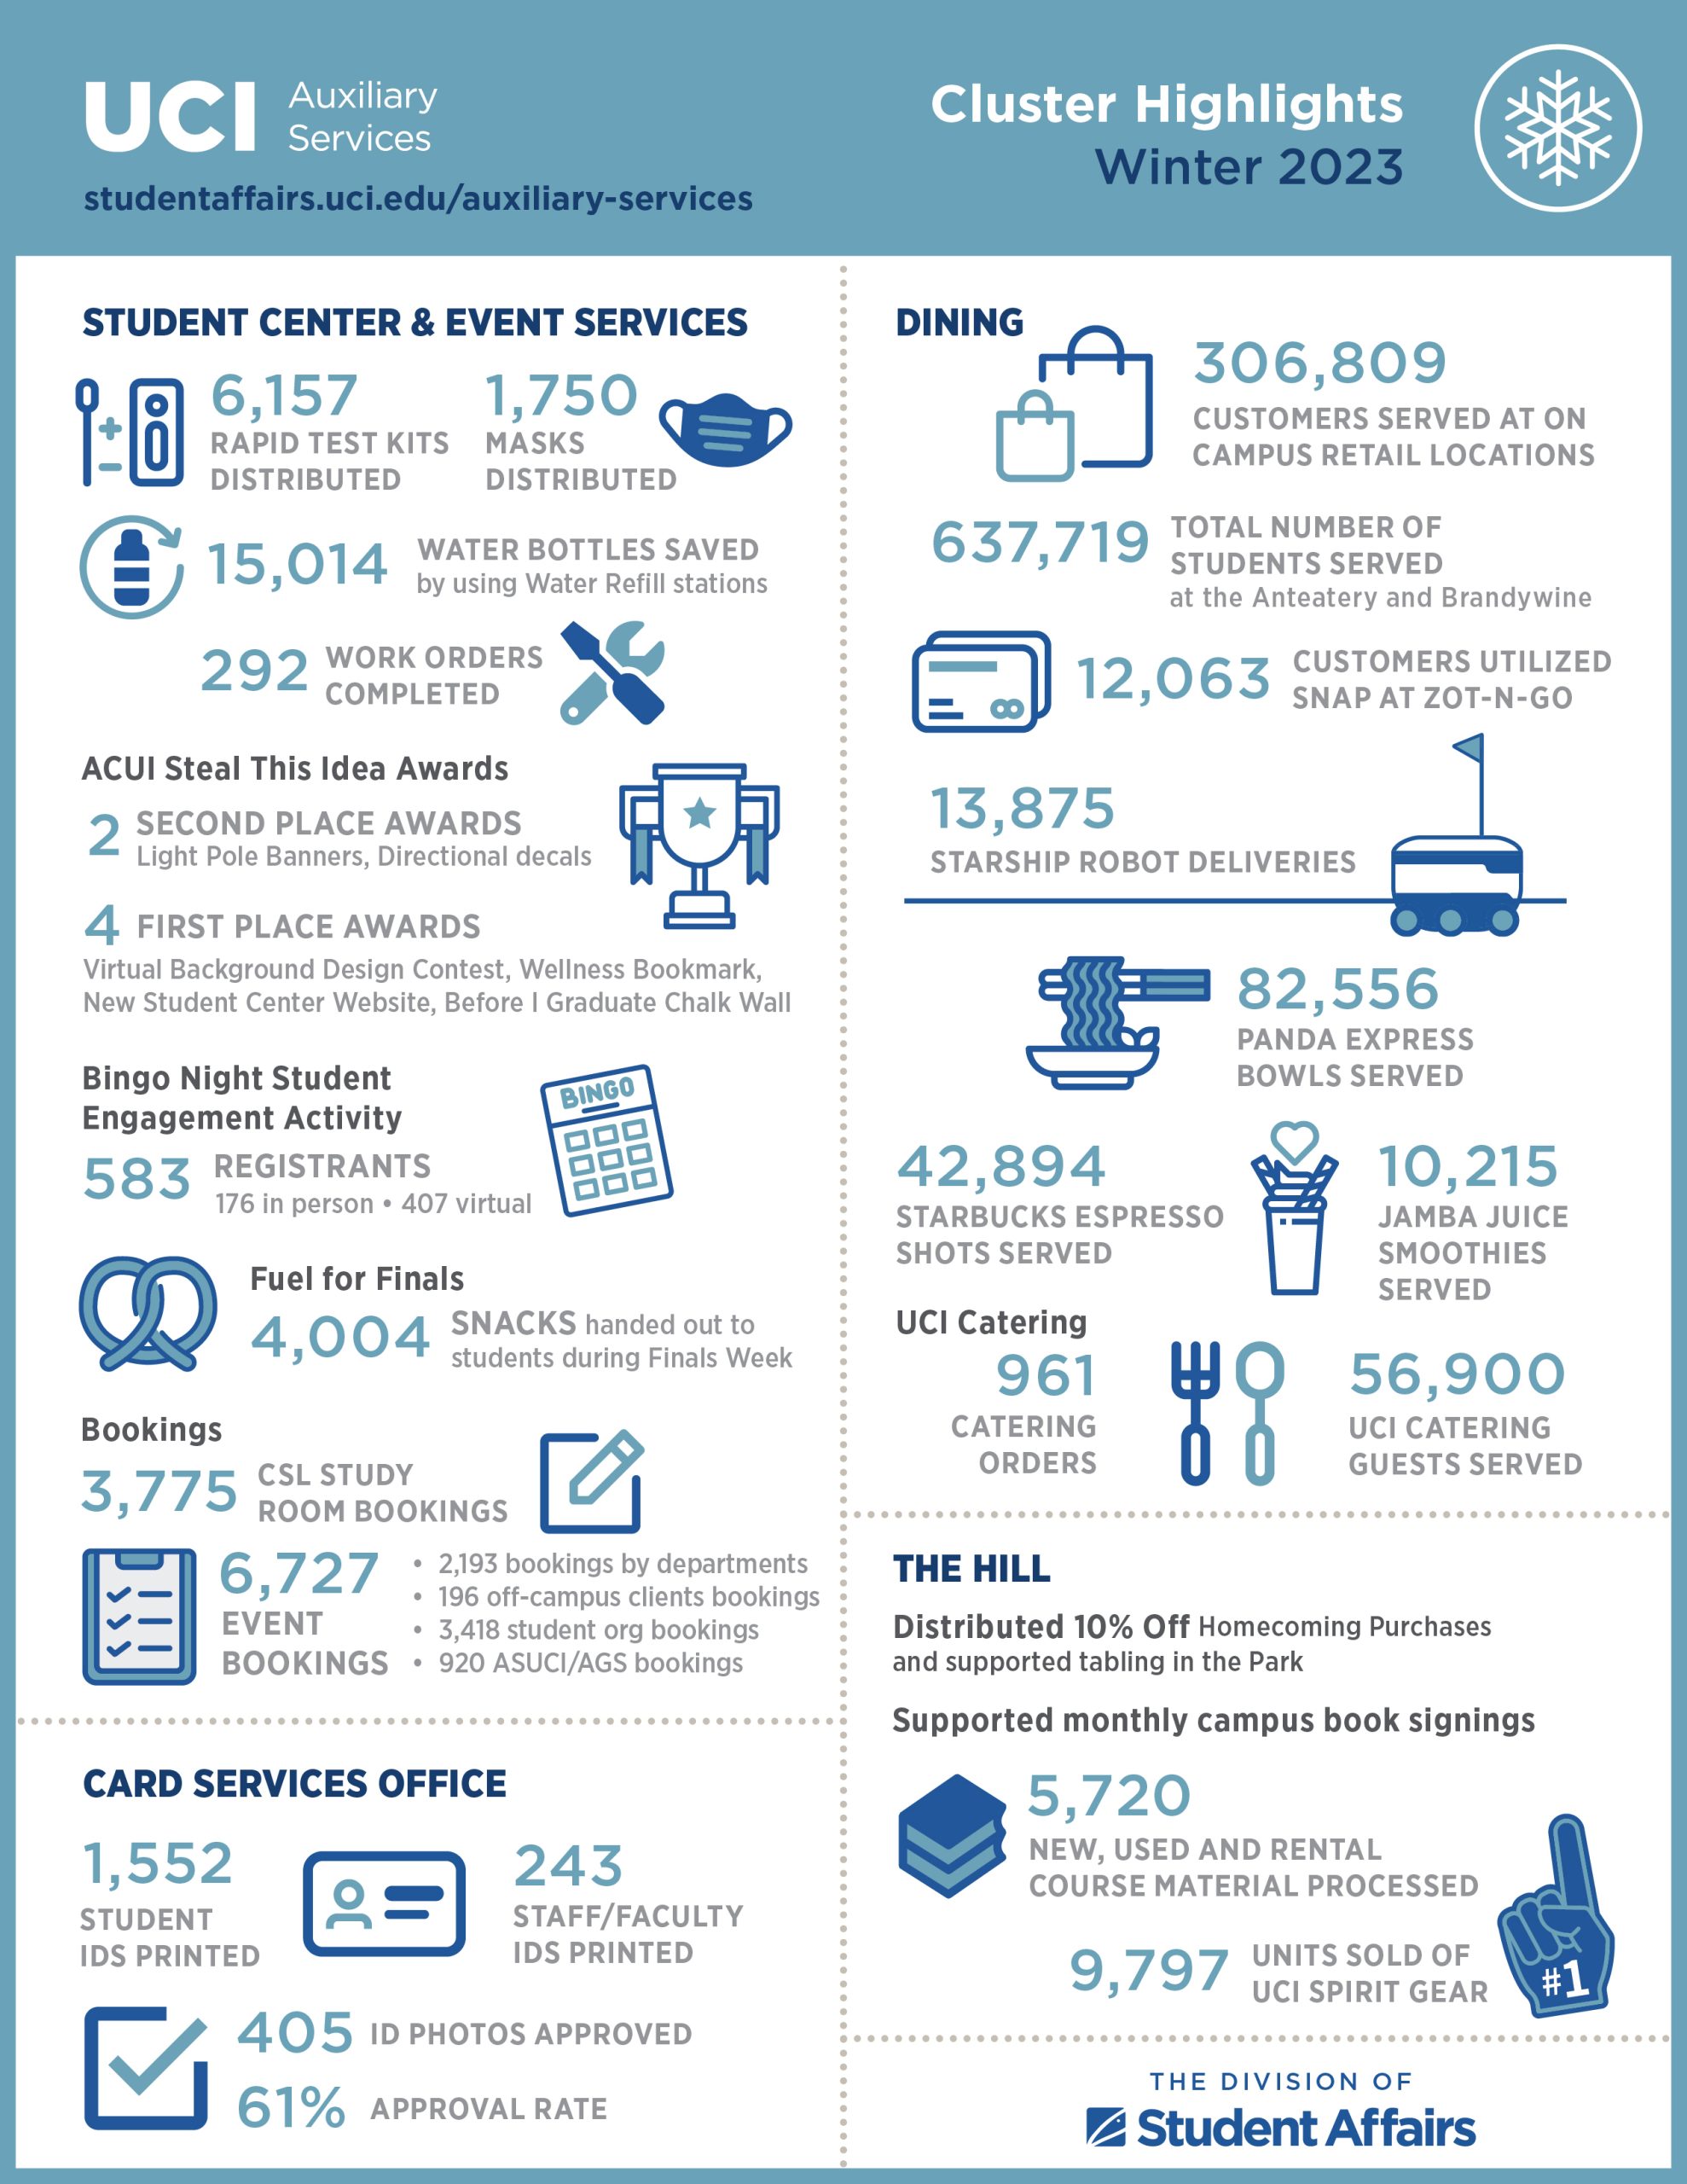 Student Affairs Auxiliary Services Winter 2023 Cluster Highlights